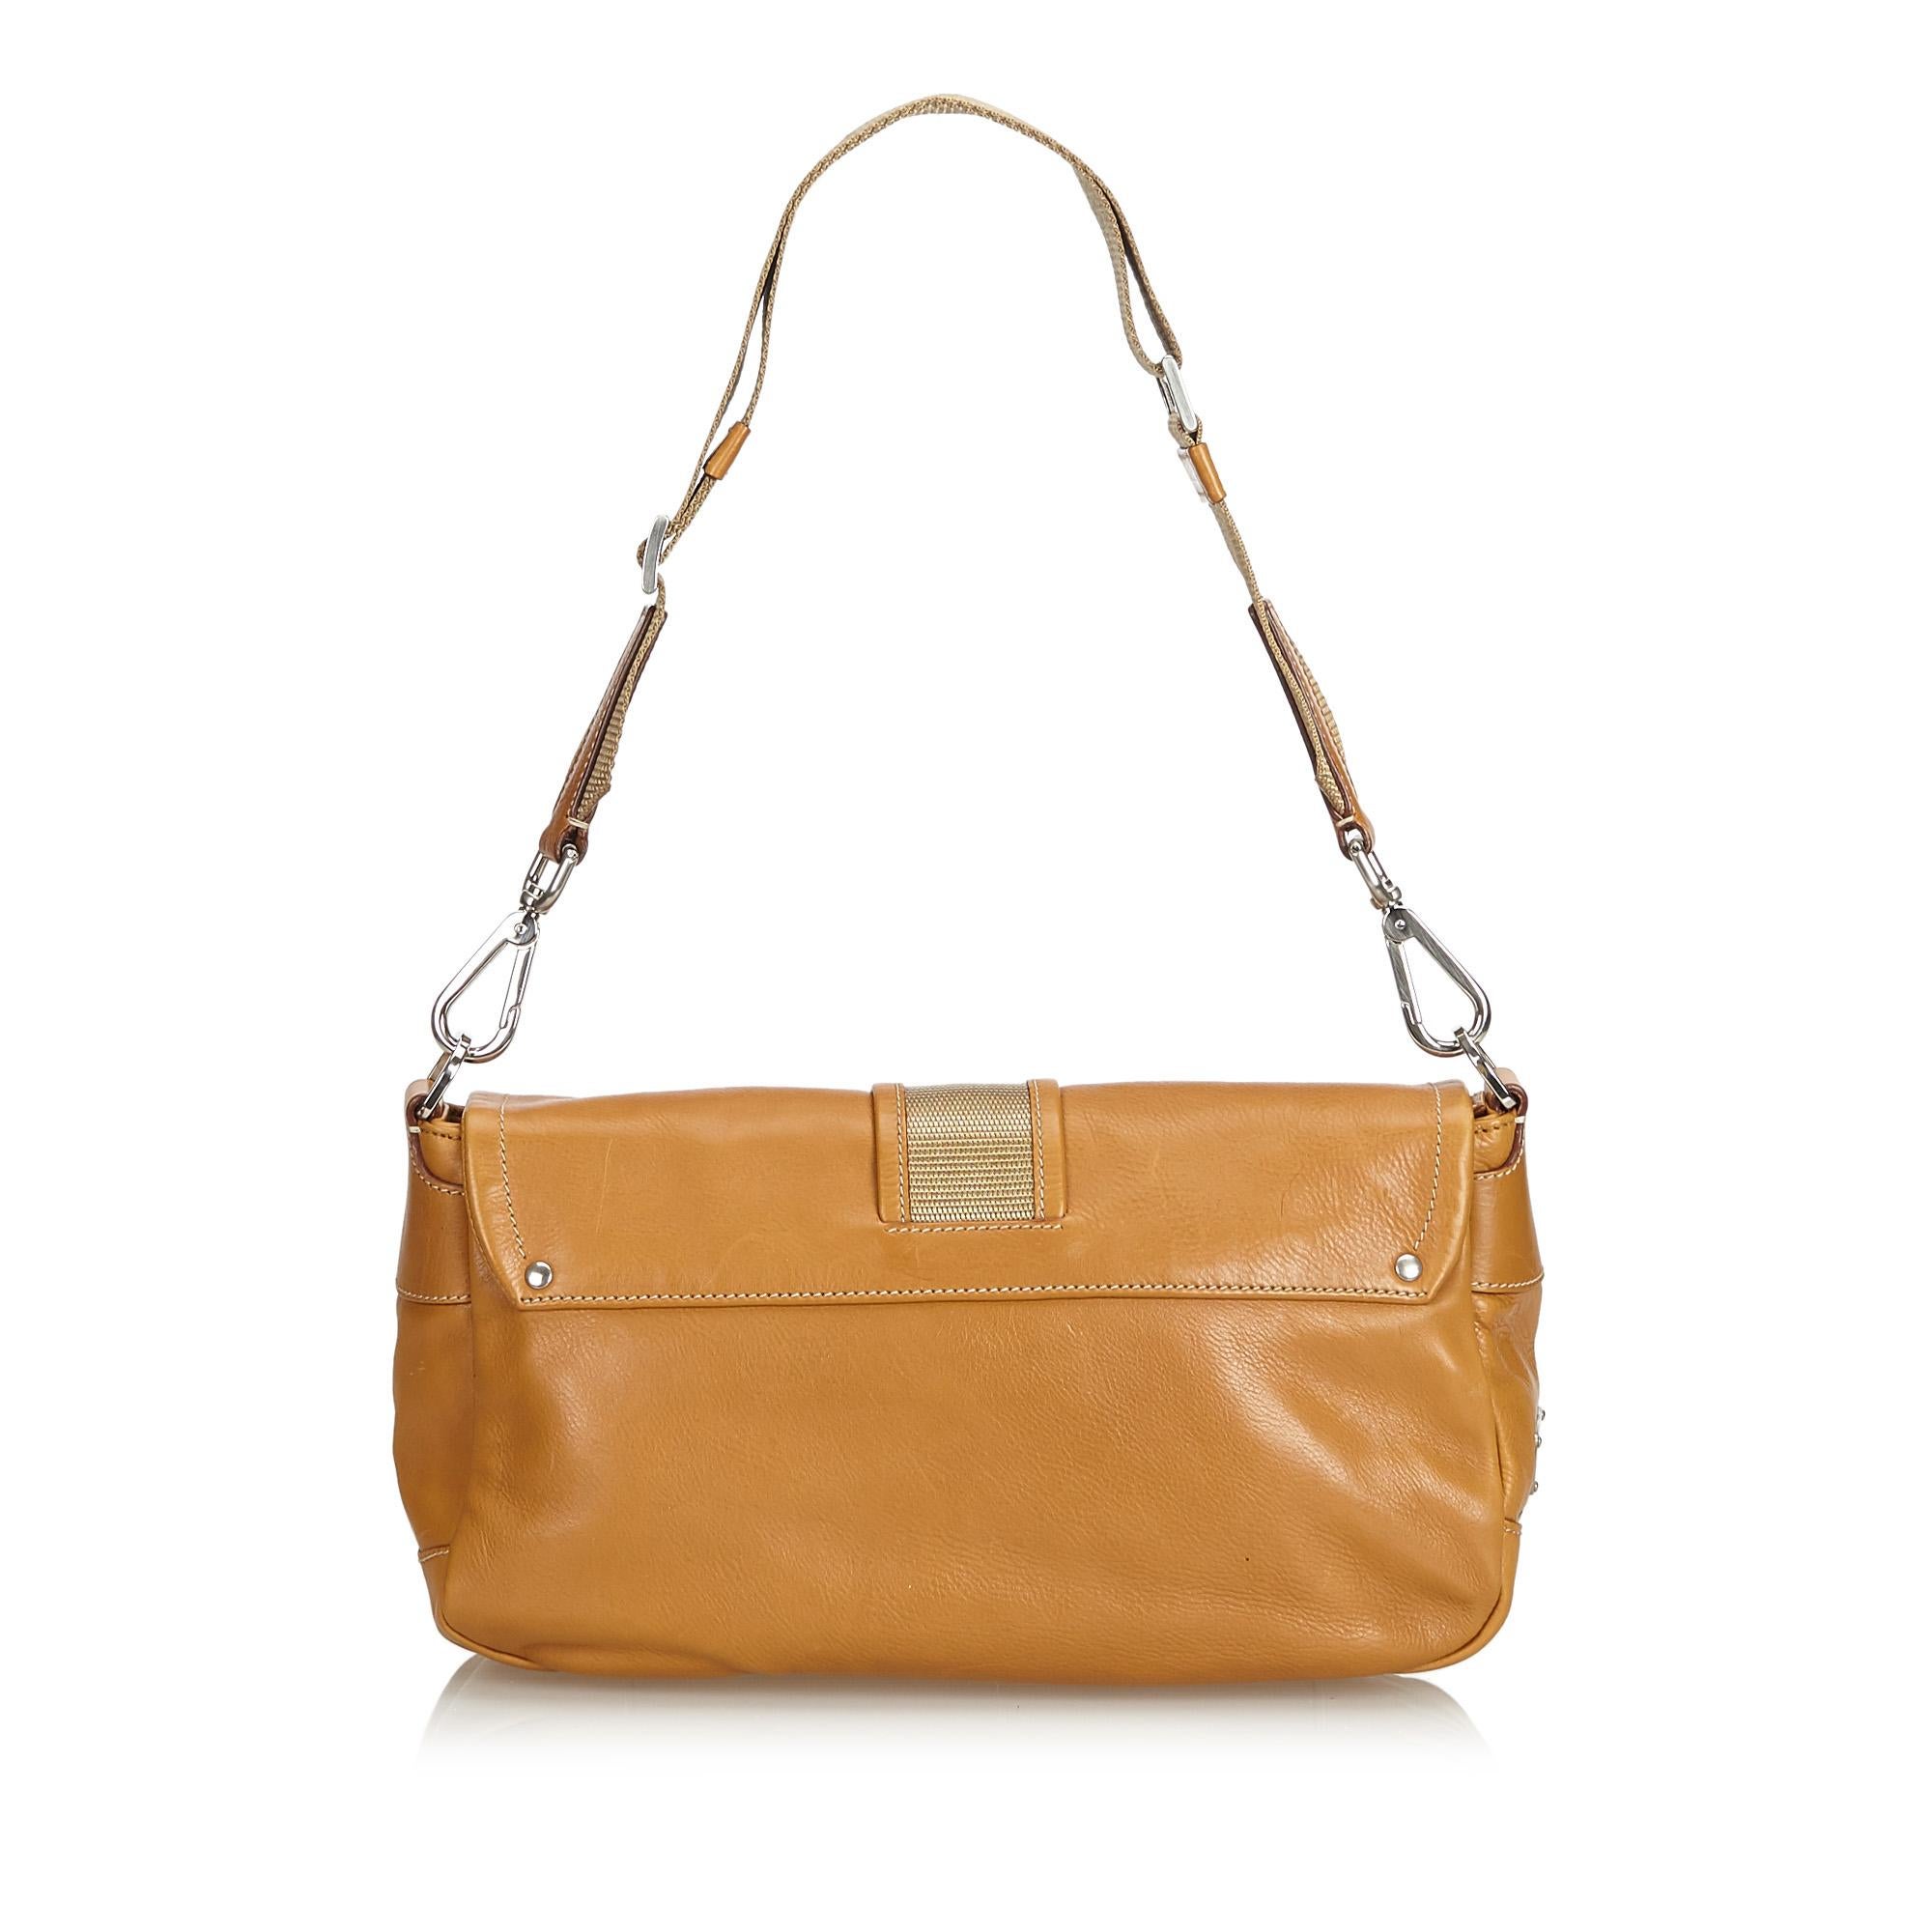 Prada Brown Leather Bagutte Bag In Good Condition For Sale In Orlando, FL